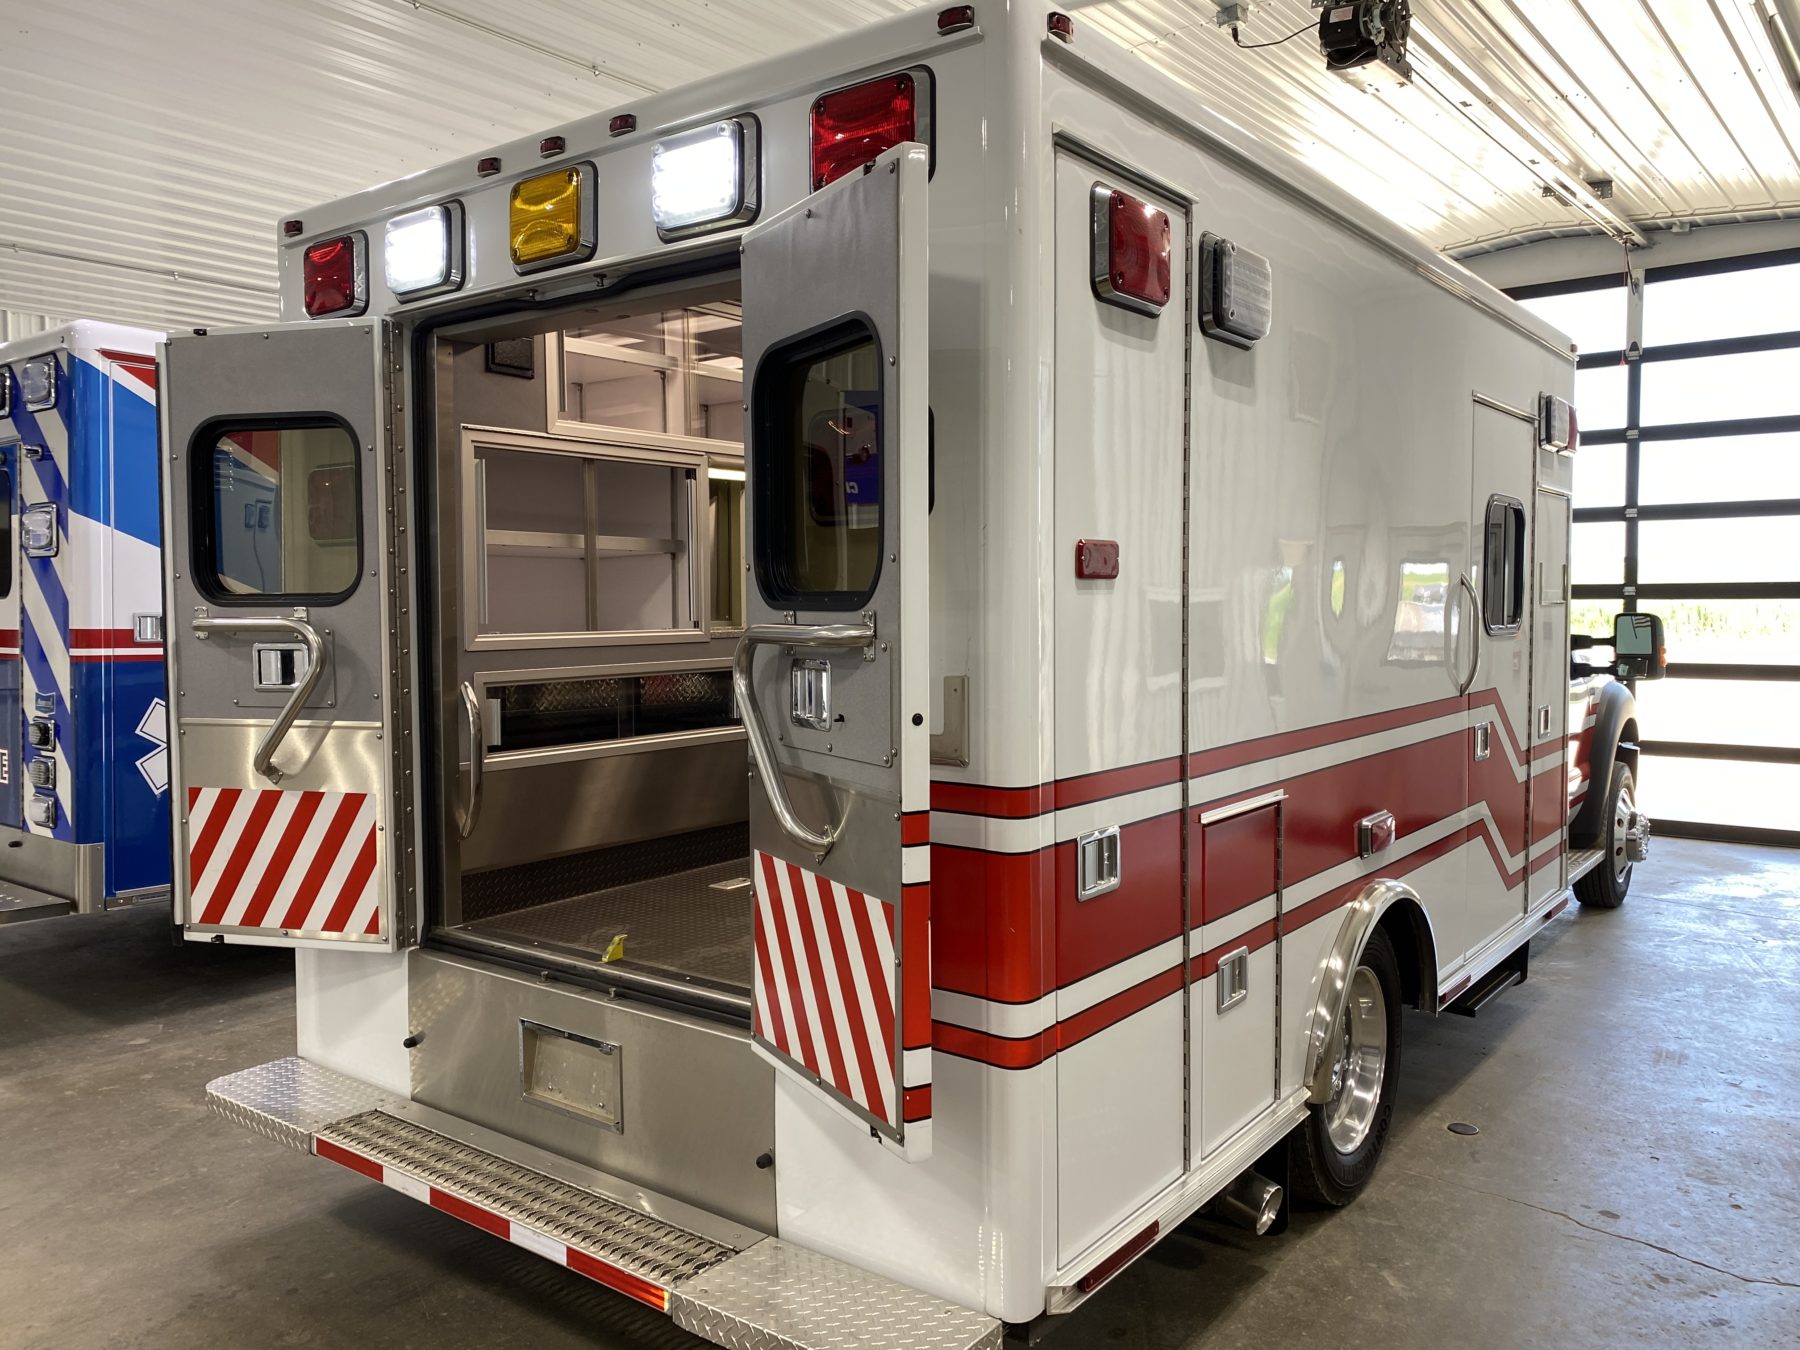 2015 Ford F450 4x4 Heavy Duty Ambulance For Sale – Picture 6